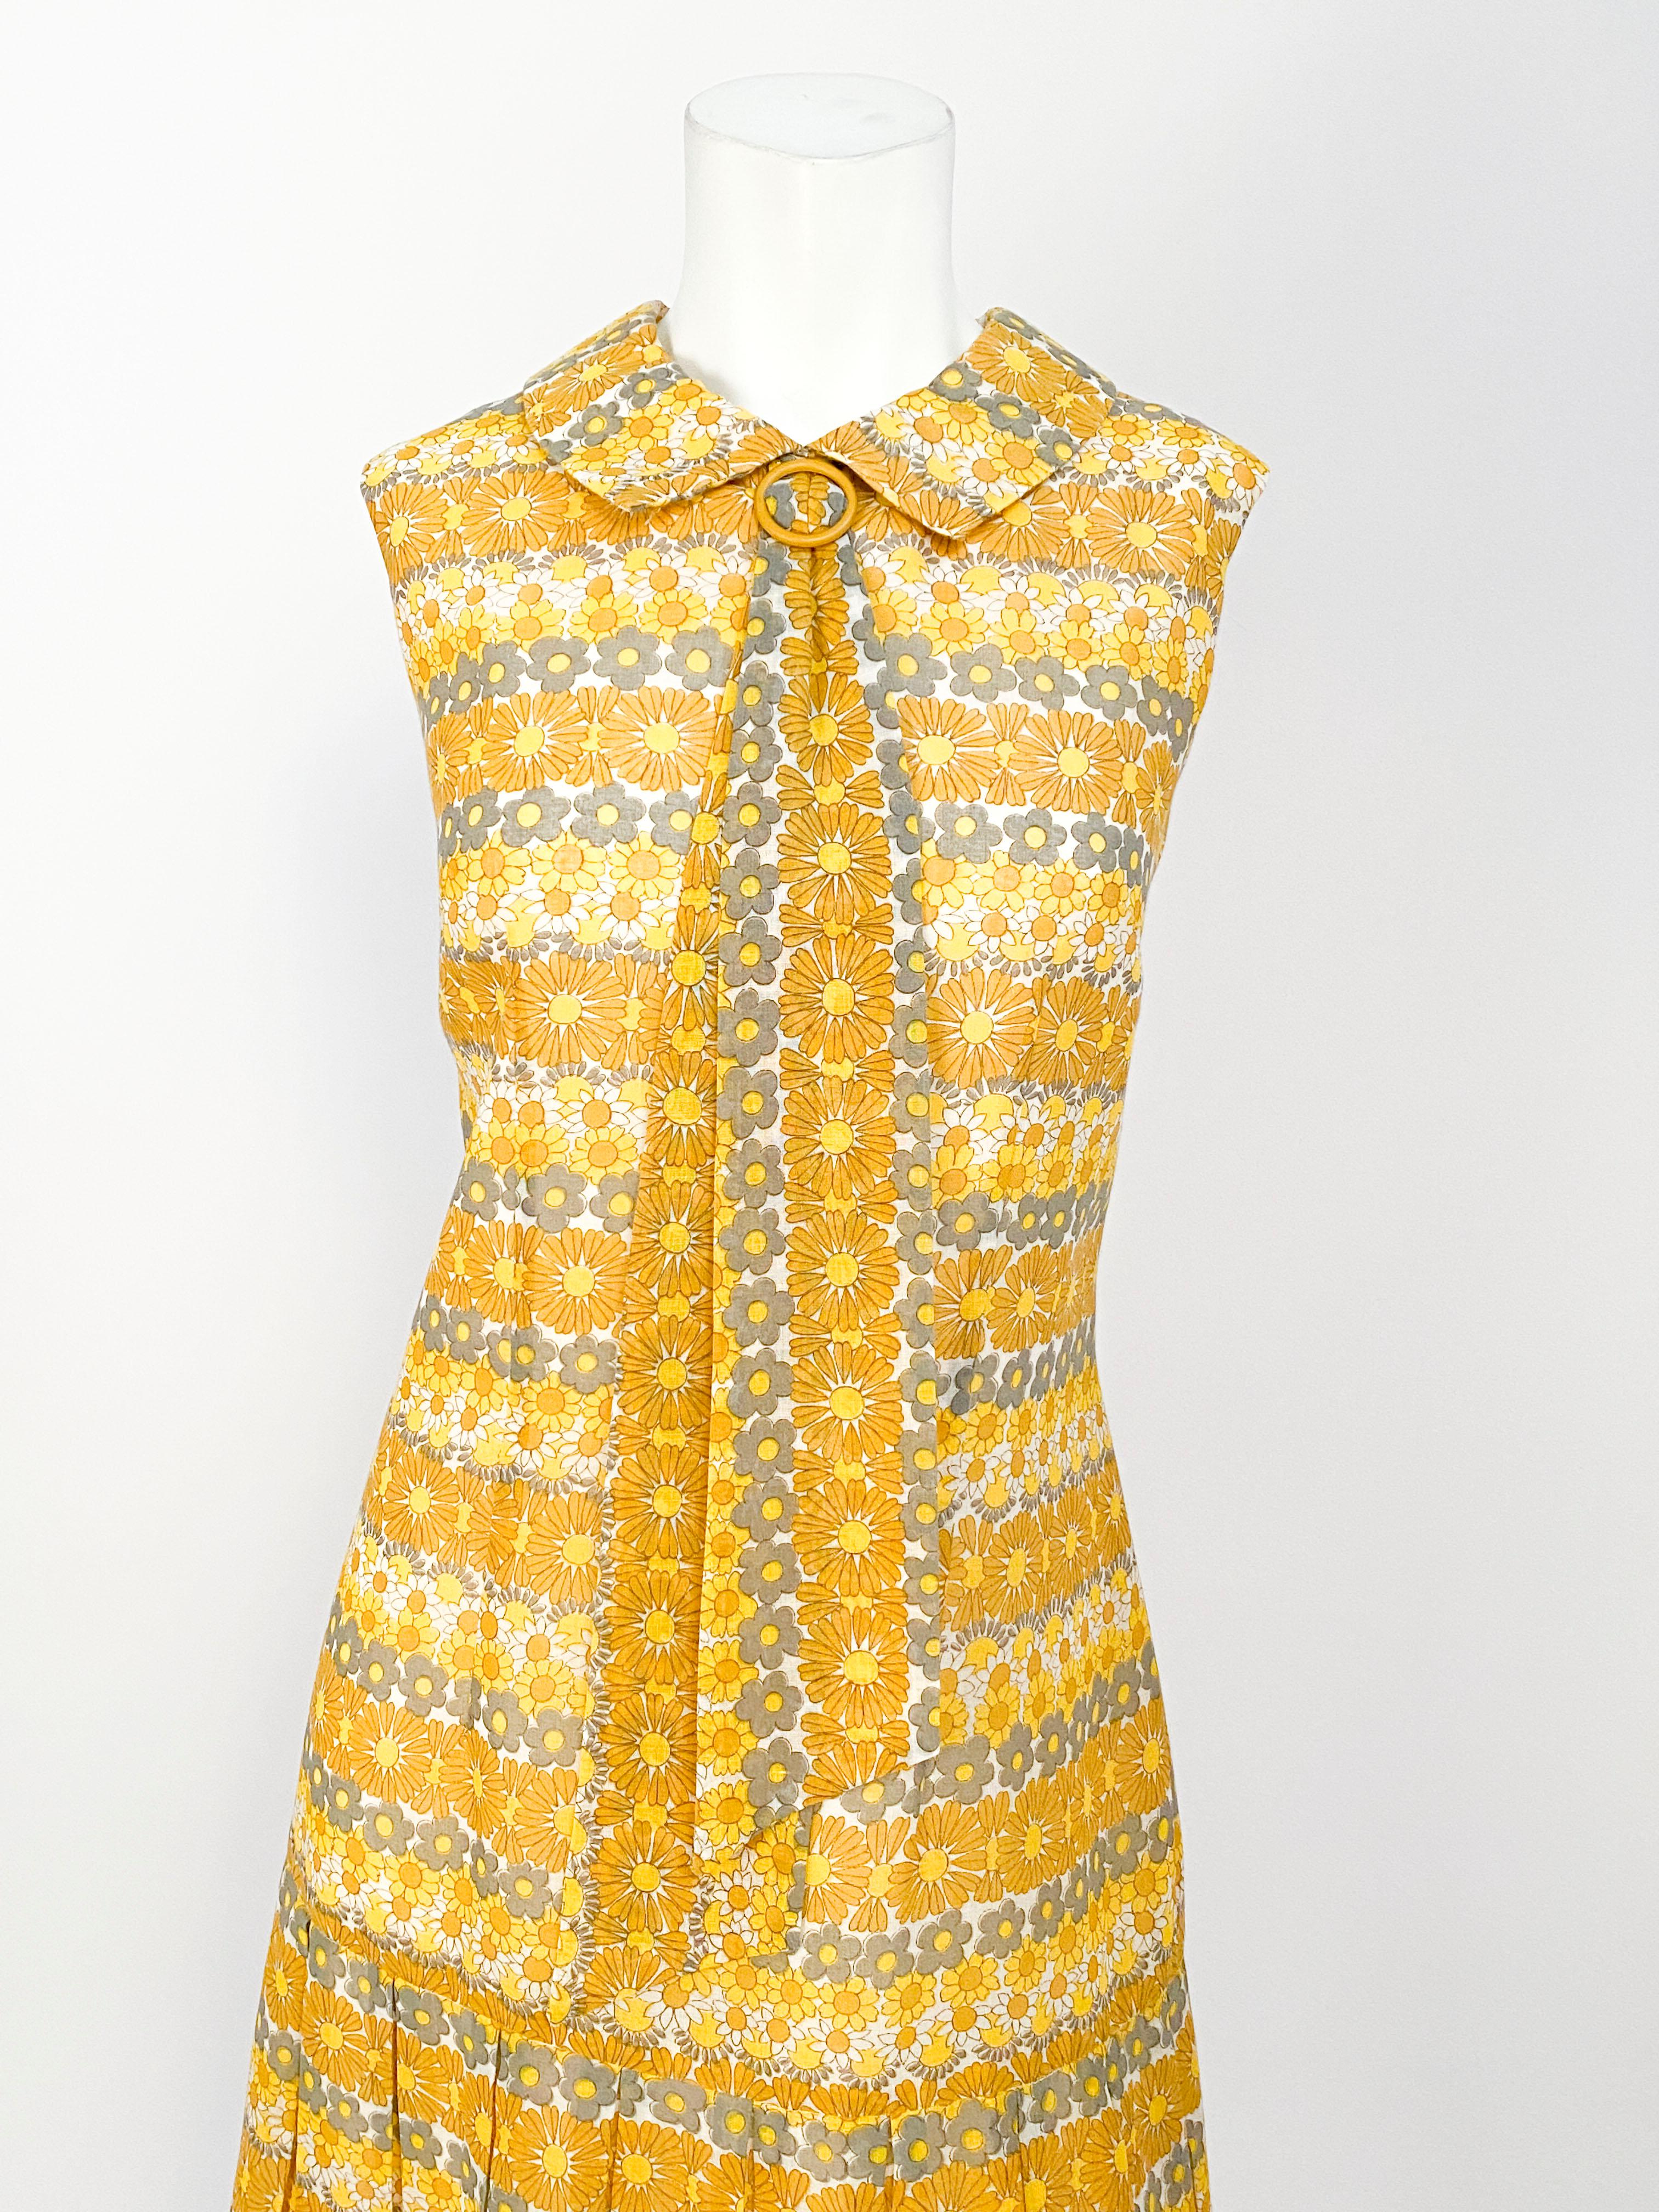 1960s yellow drop waist dress featuring a dense daisy print in tones of yellow and grey. The skirt is pleated and the peter pan collar is finished with a buckled elongated tie. 